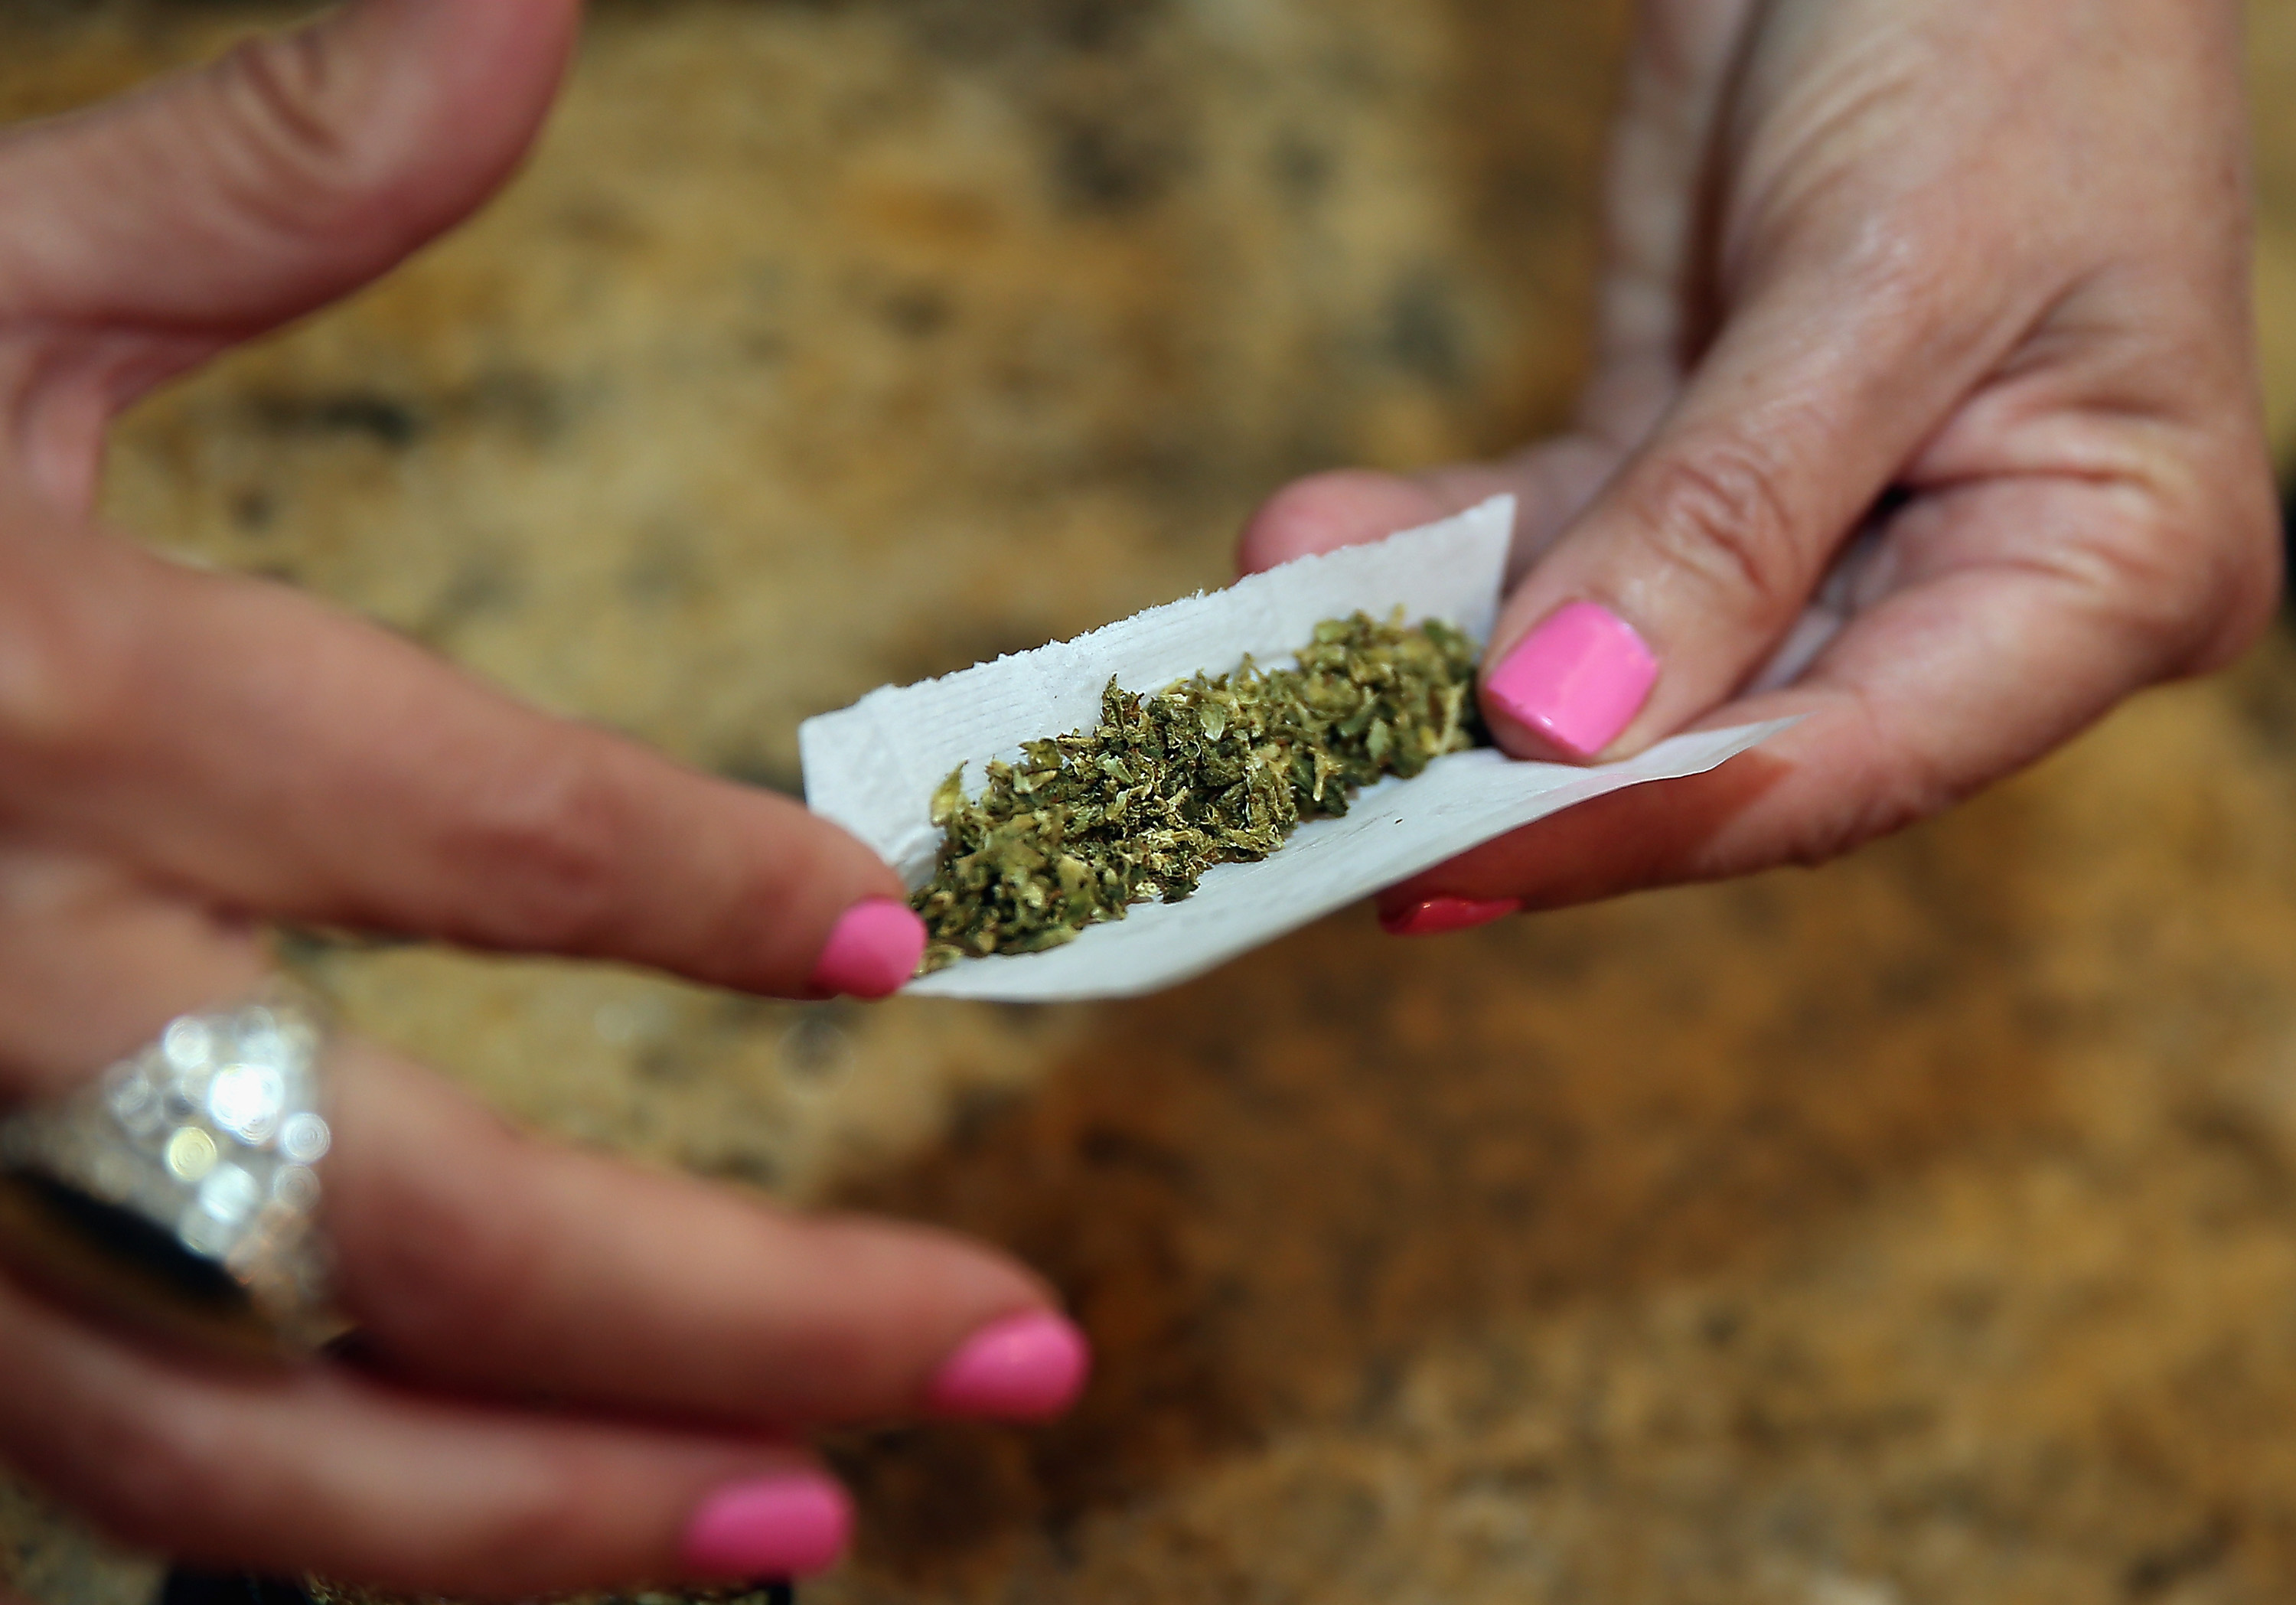 A woman rolls a marijuana cigarette as photographed on August 30, 2014 in Bethpage, New York. (Bruce Bennett&mdash;Getty Images)